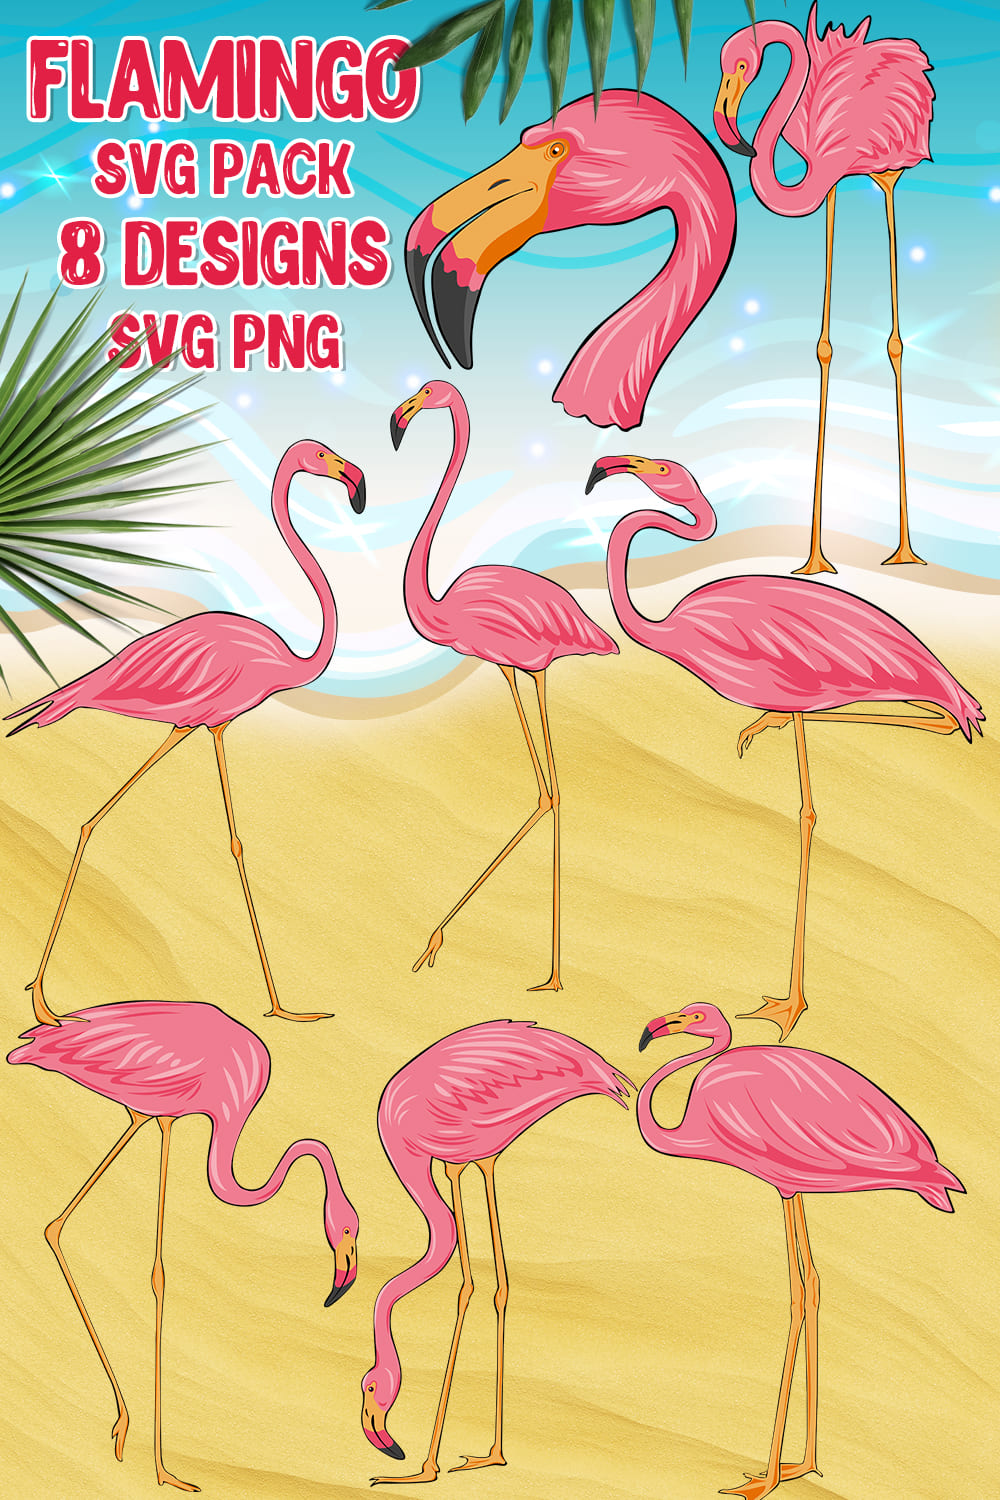 Group of pink flamingos standing on top of a sandy beach.